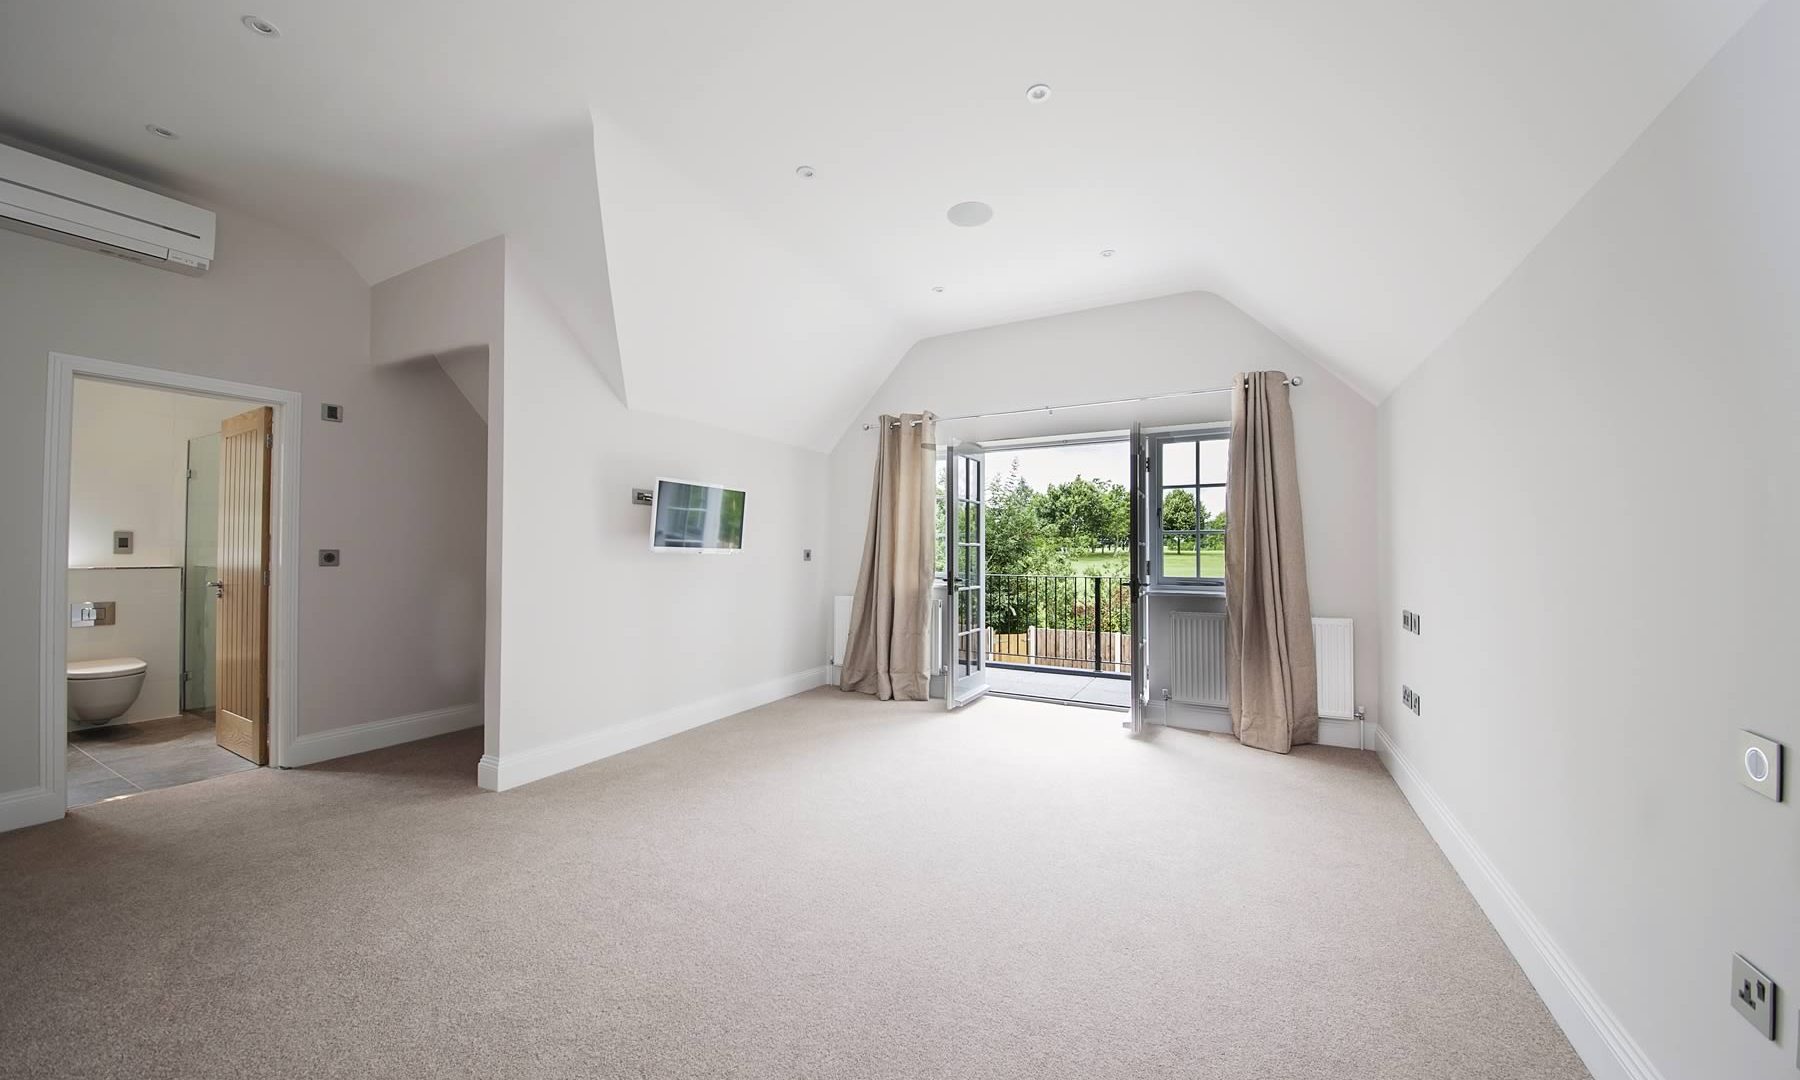 An empty bedroom with fitted carpet, ensuite and doors leading out to a balcony